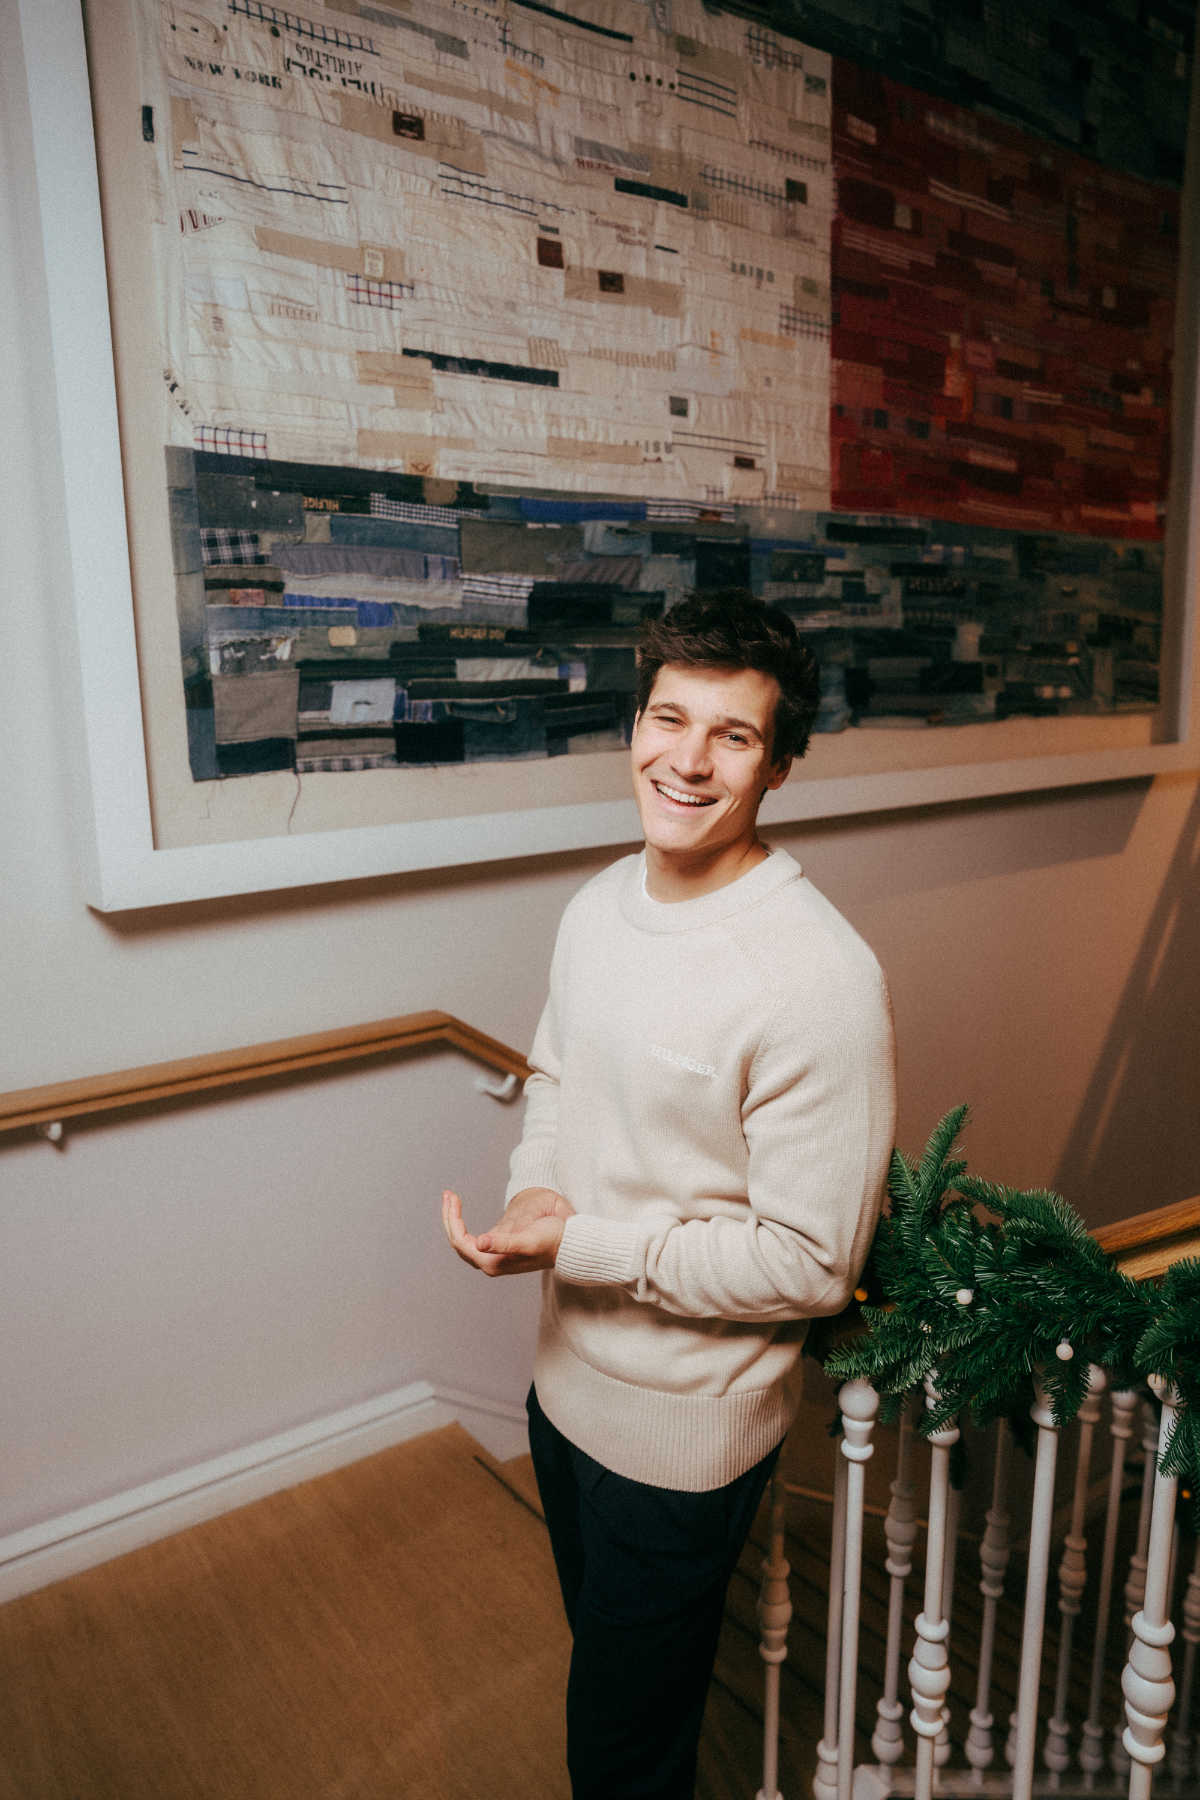 Wincent Weiss Celebrates The Festive Season With Exclusive Concert At The Tommy Hilfiger Hamburg Sto